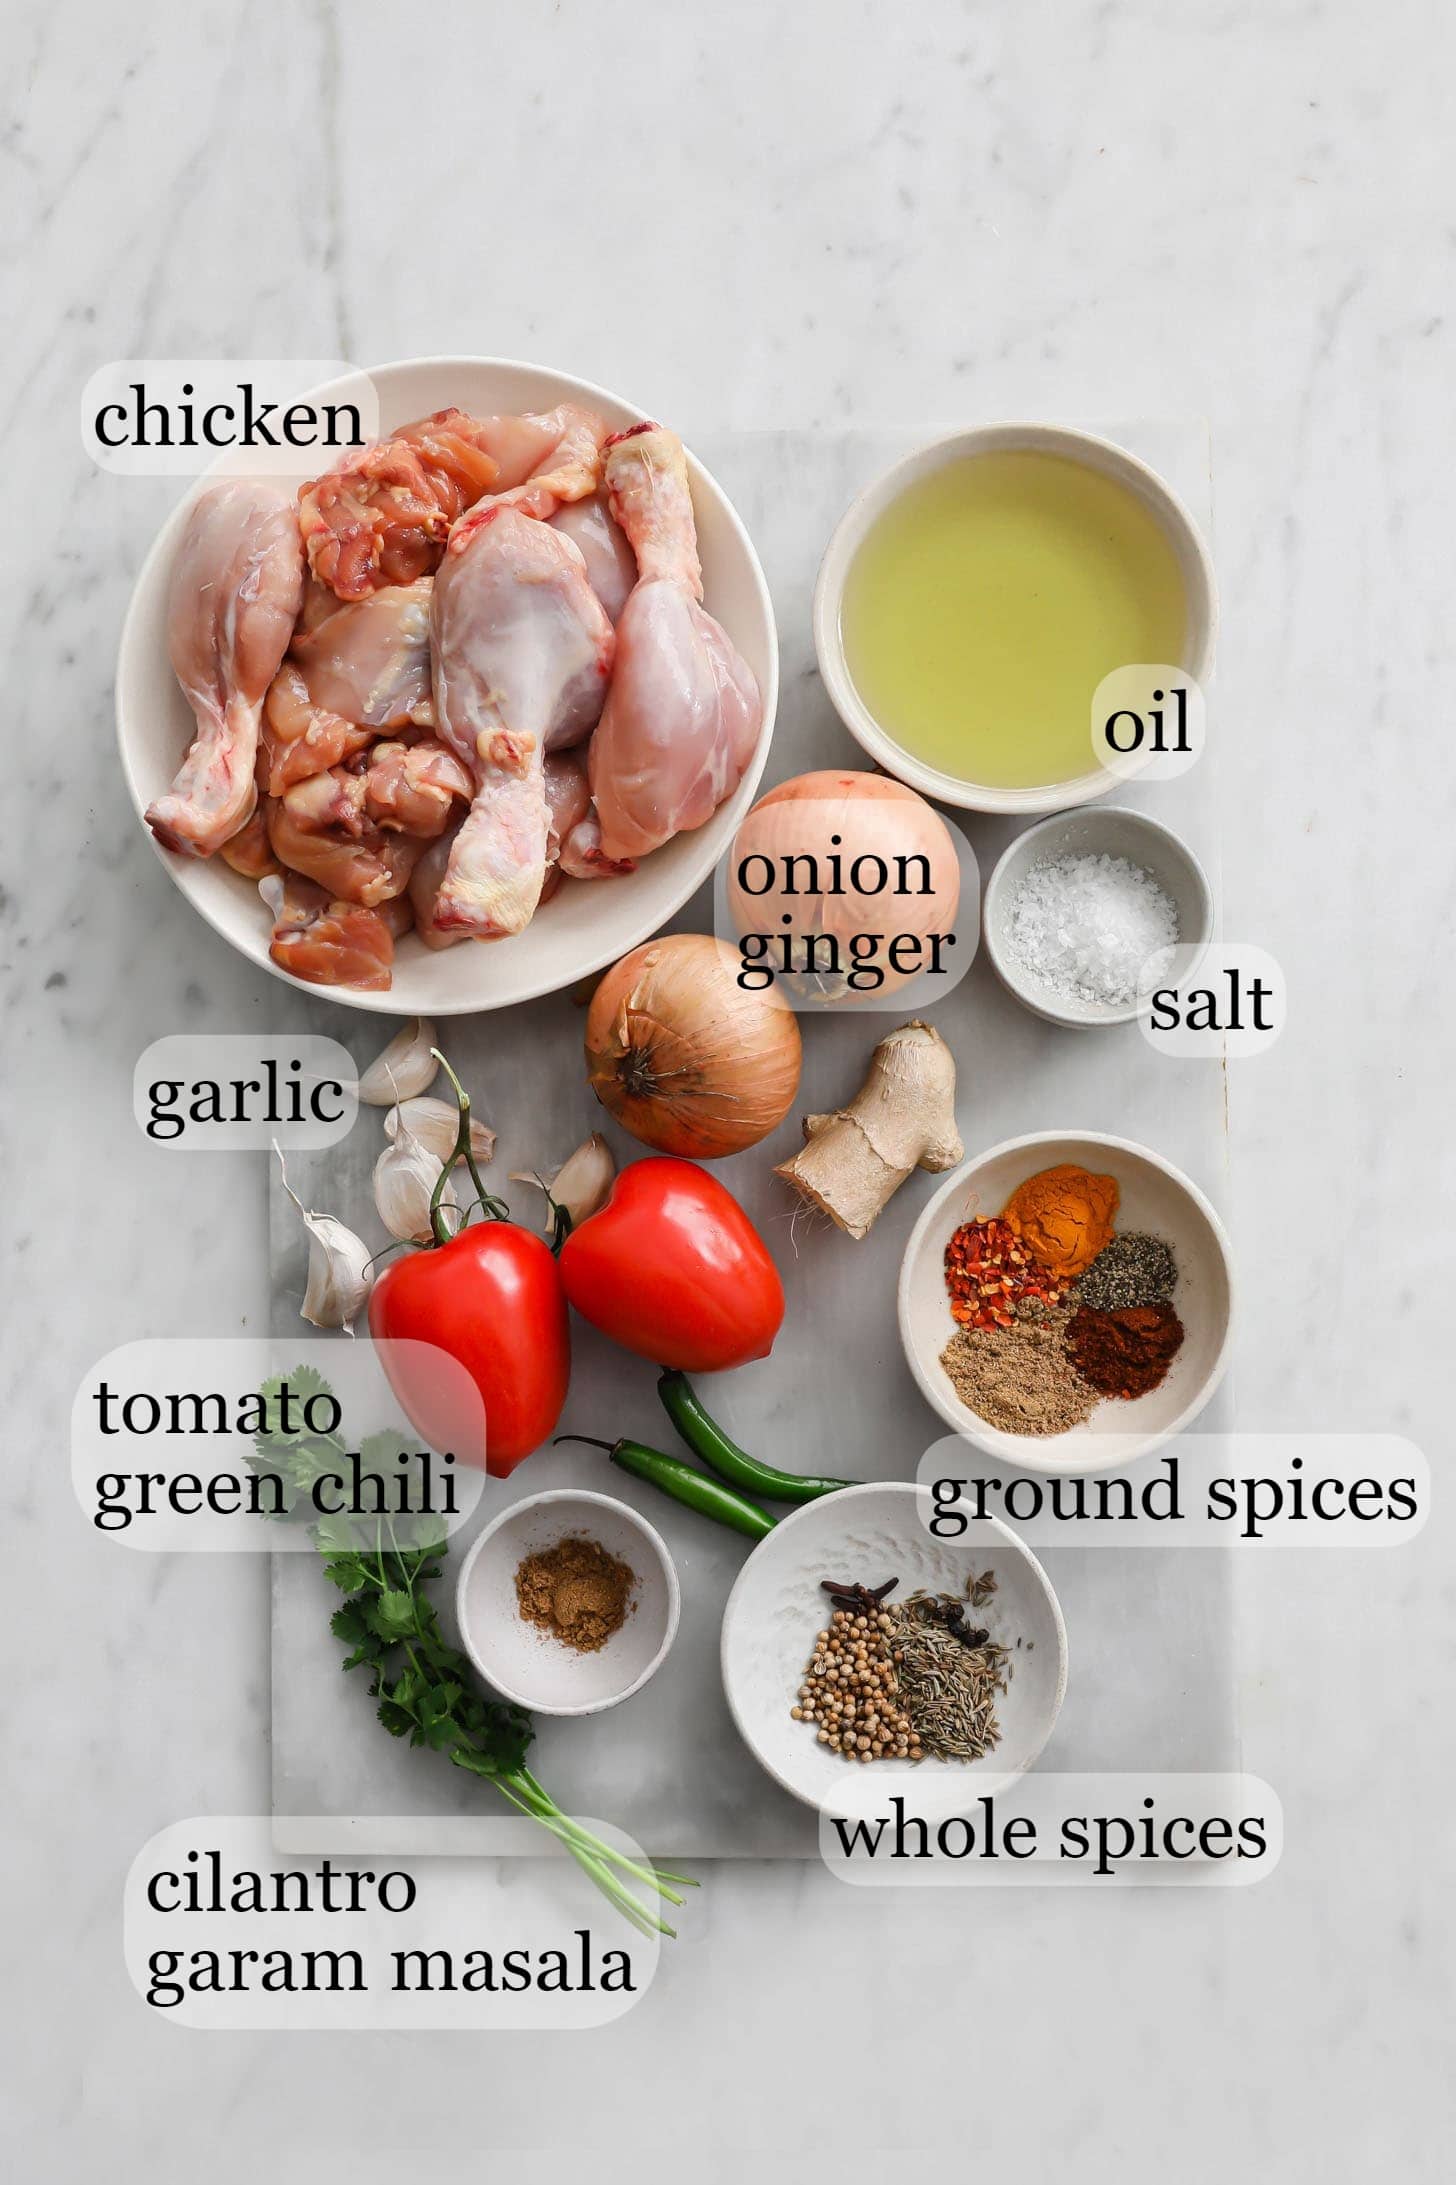 Ingredients for the curry such as chicken, onions, salt, ginger, garlic, tomatoes, green chili peppers, and spices on a marbled surface